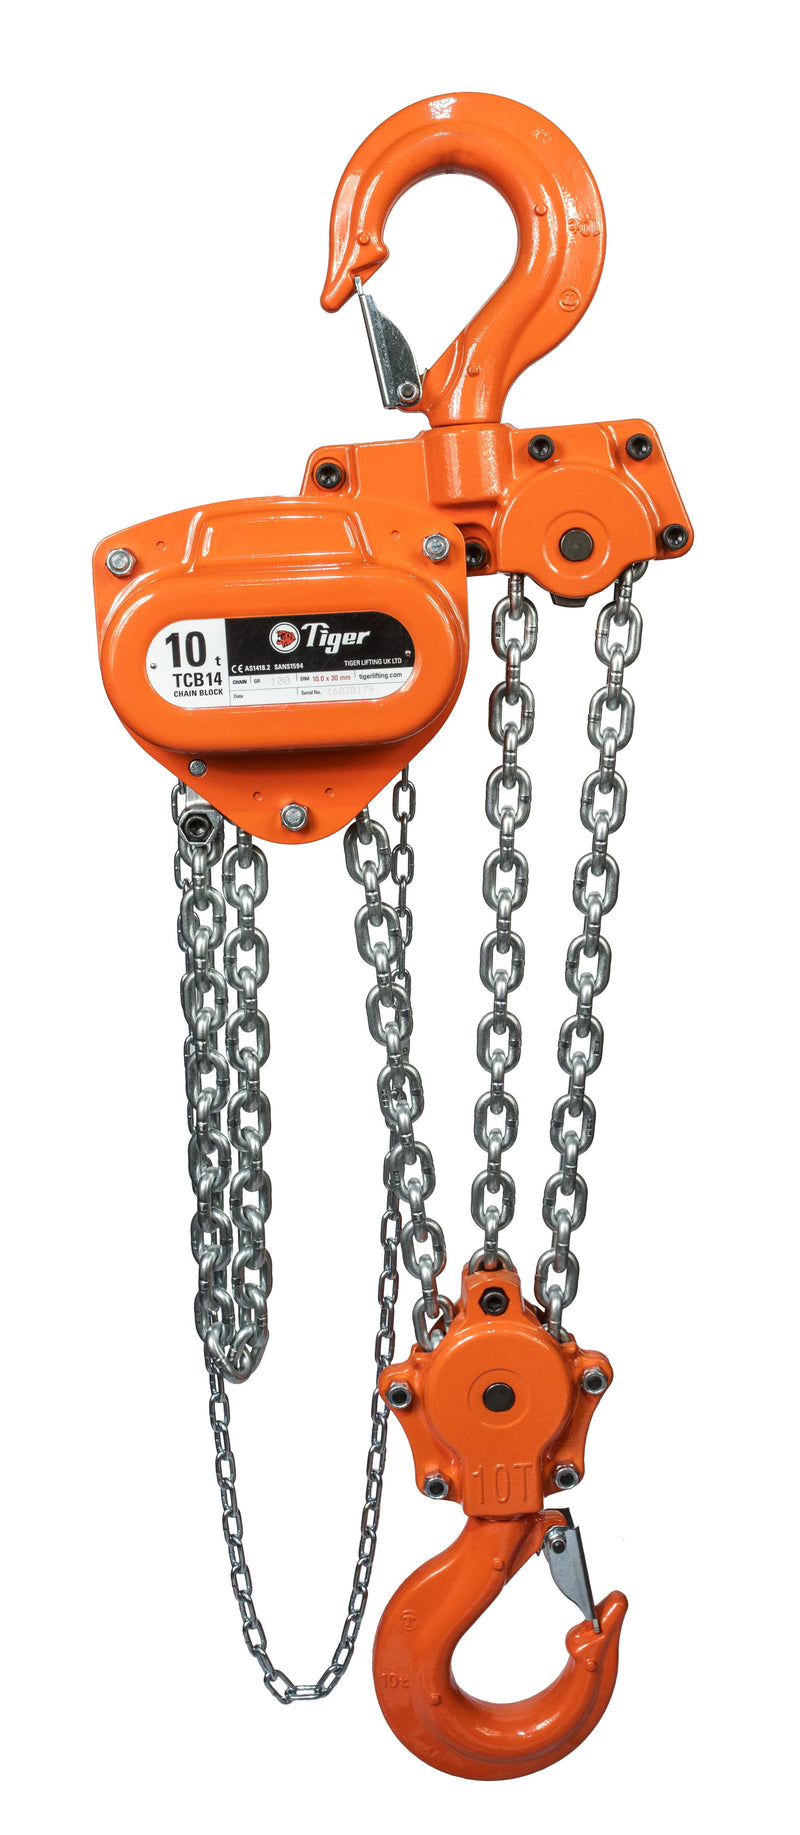 TIGER CHAIN BLOCK PROCB14, 10.0t CAPACITY Ref: 211-10 - available from RiggingUK available next day delivery UK